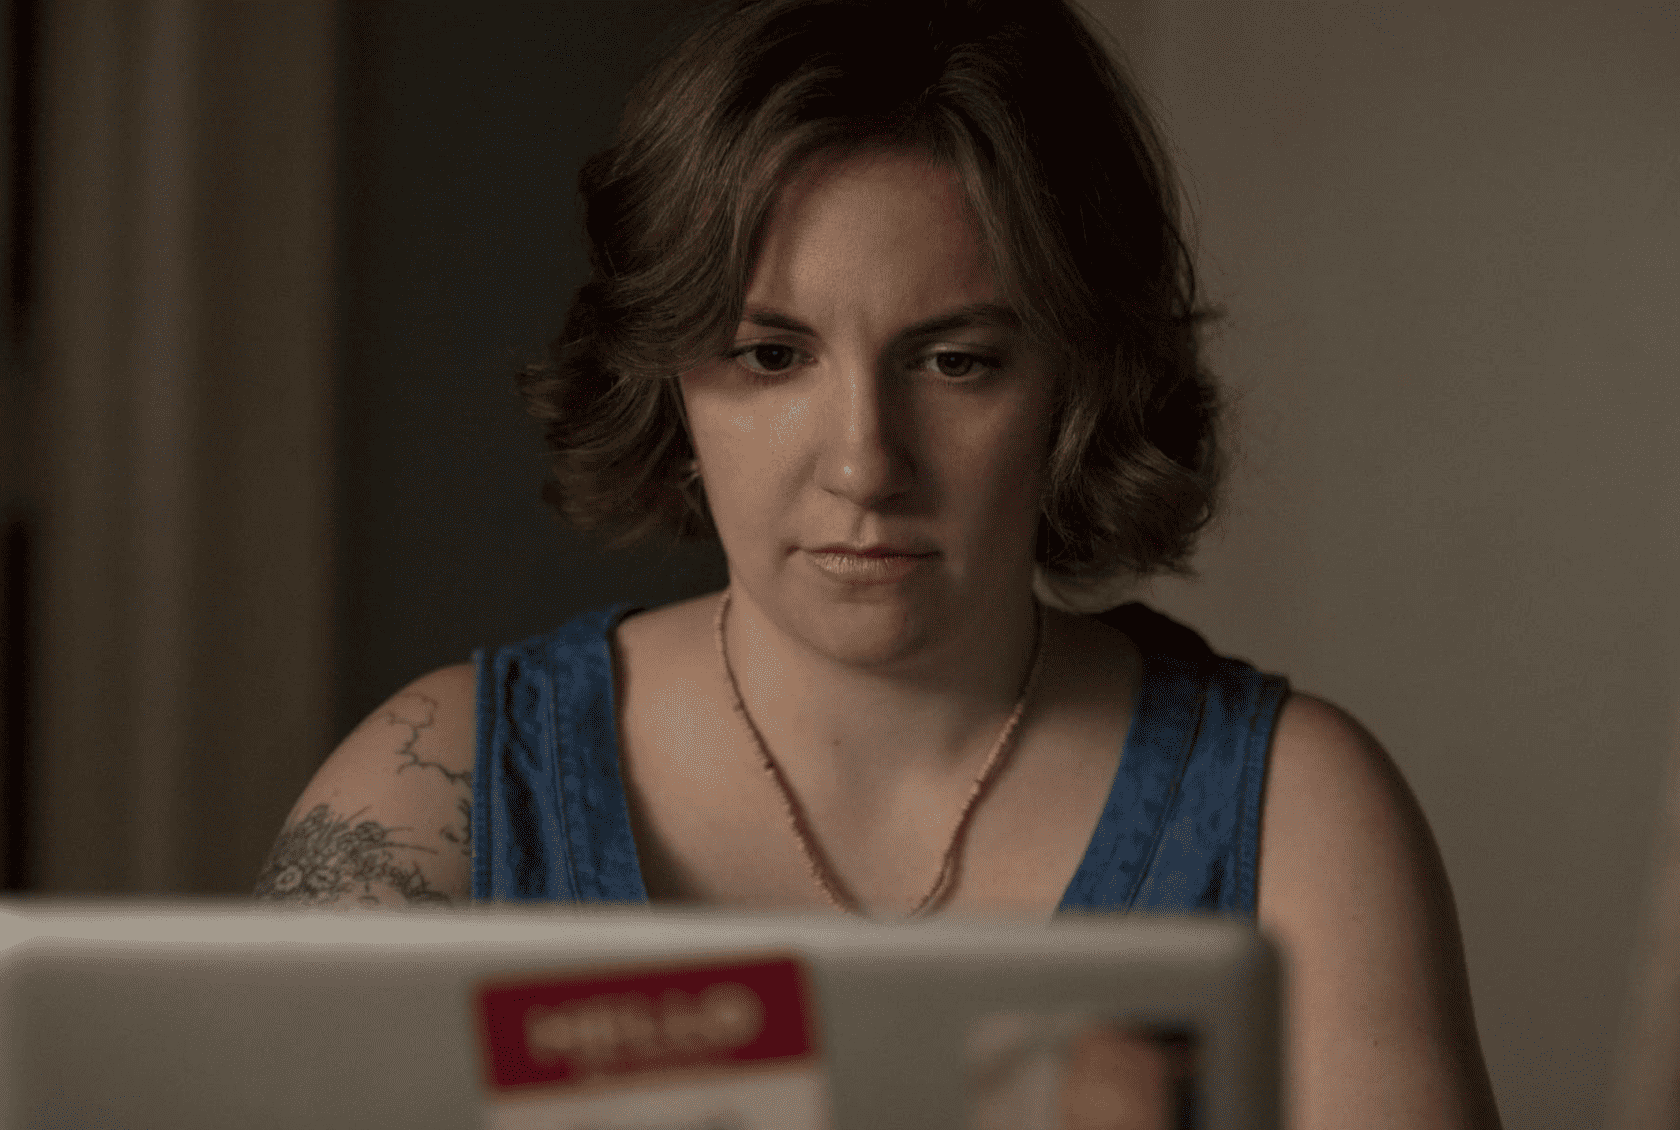 Hannah sitting at her desk writing on her laptop in this image from Apatow Productions